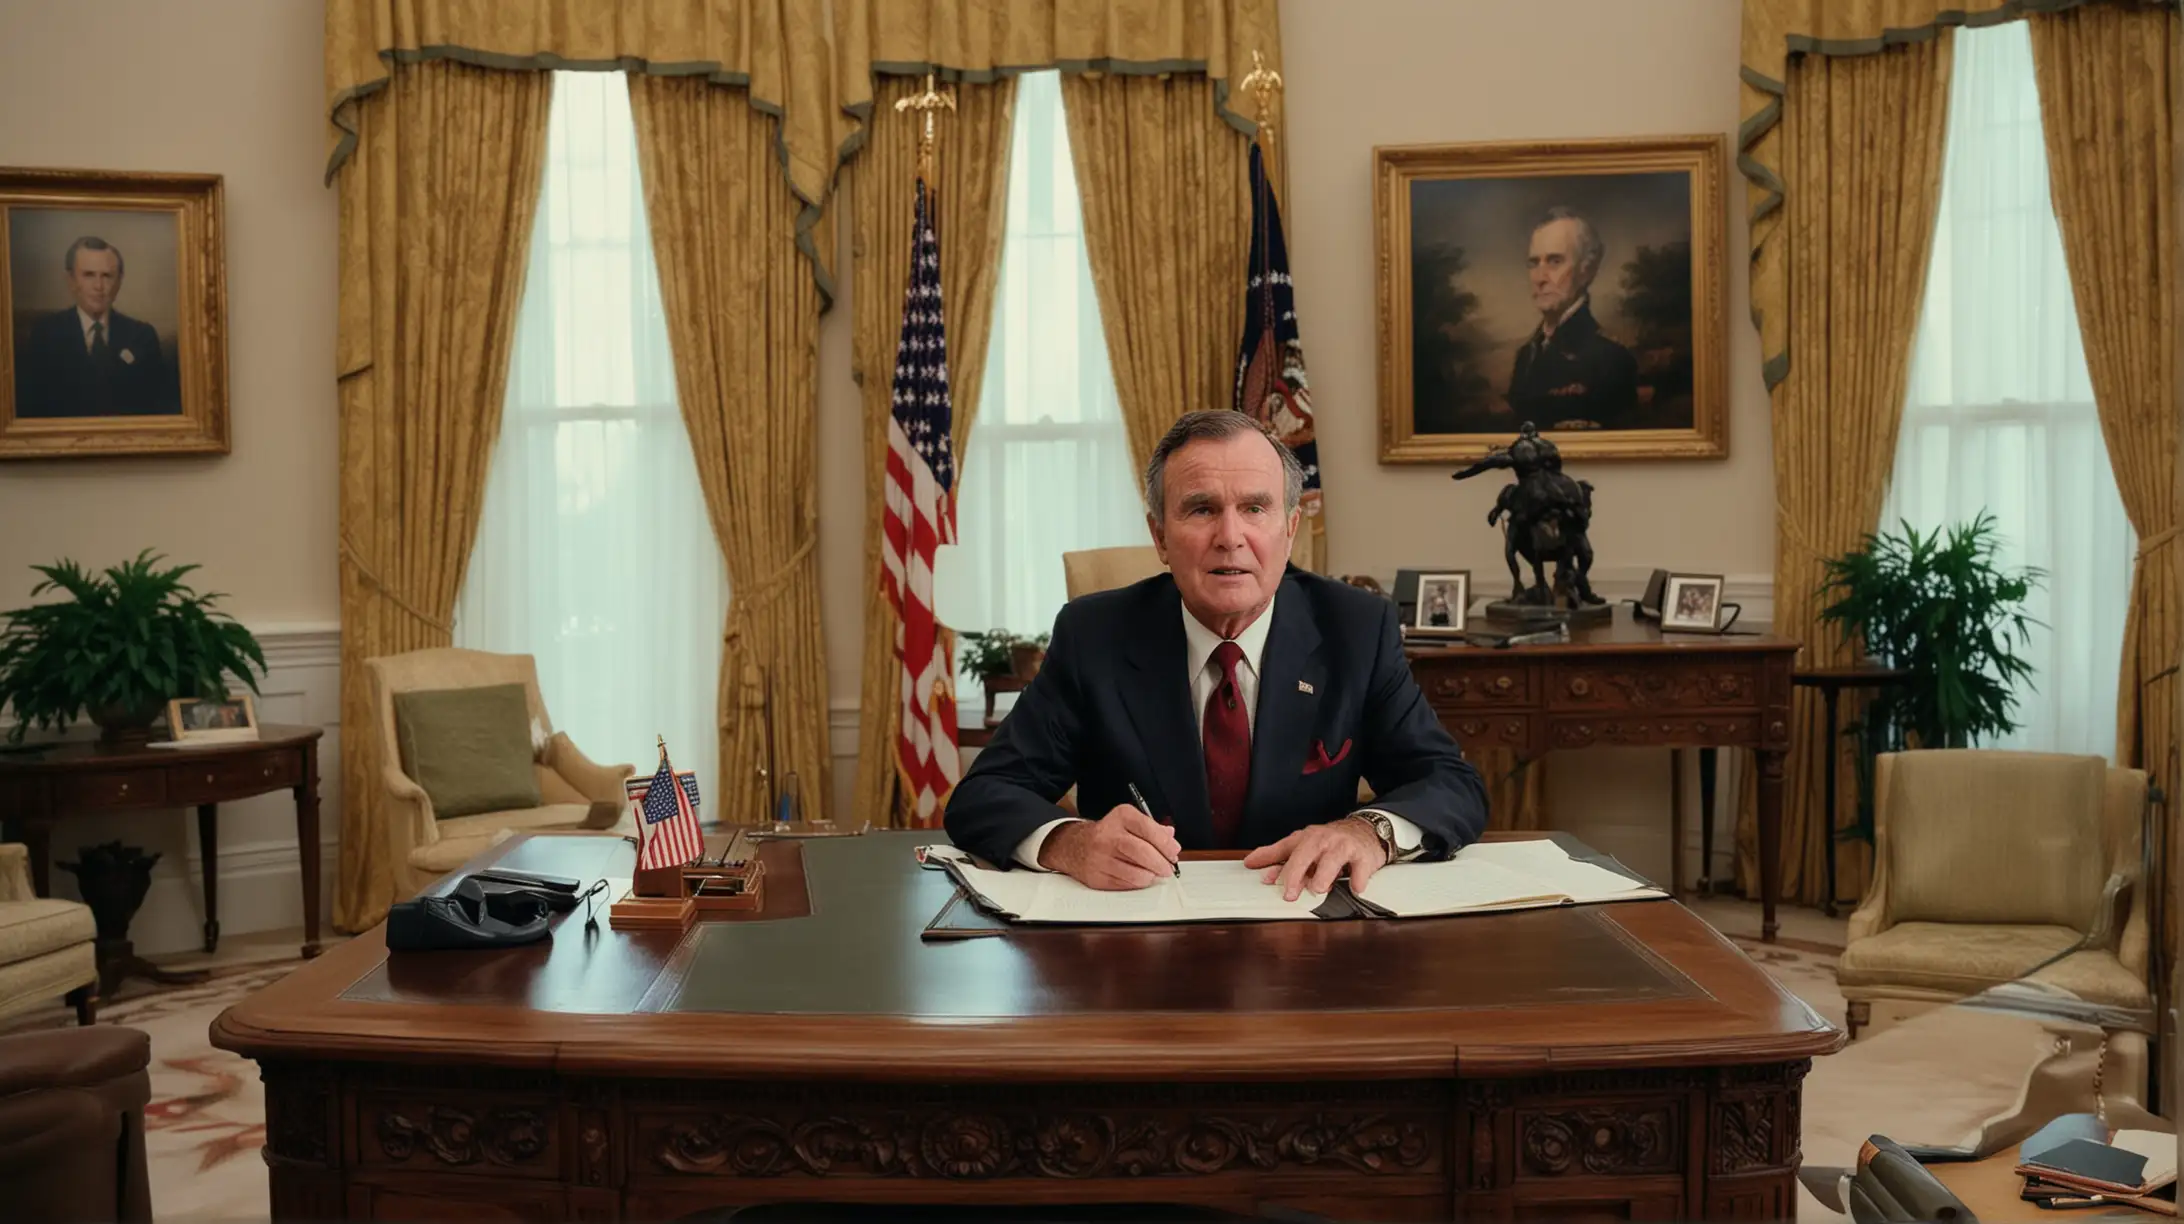 A dramatic image of George H. W. Bush addressing the nation from the Oval Office, with visuals of military operations in the Persian Gulf region, illustrating his leadership of the international coalition during the Gulf War and the liberation of Kuwait from Iraqi invasion.